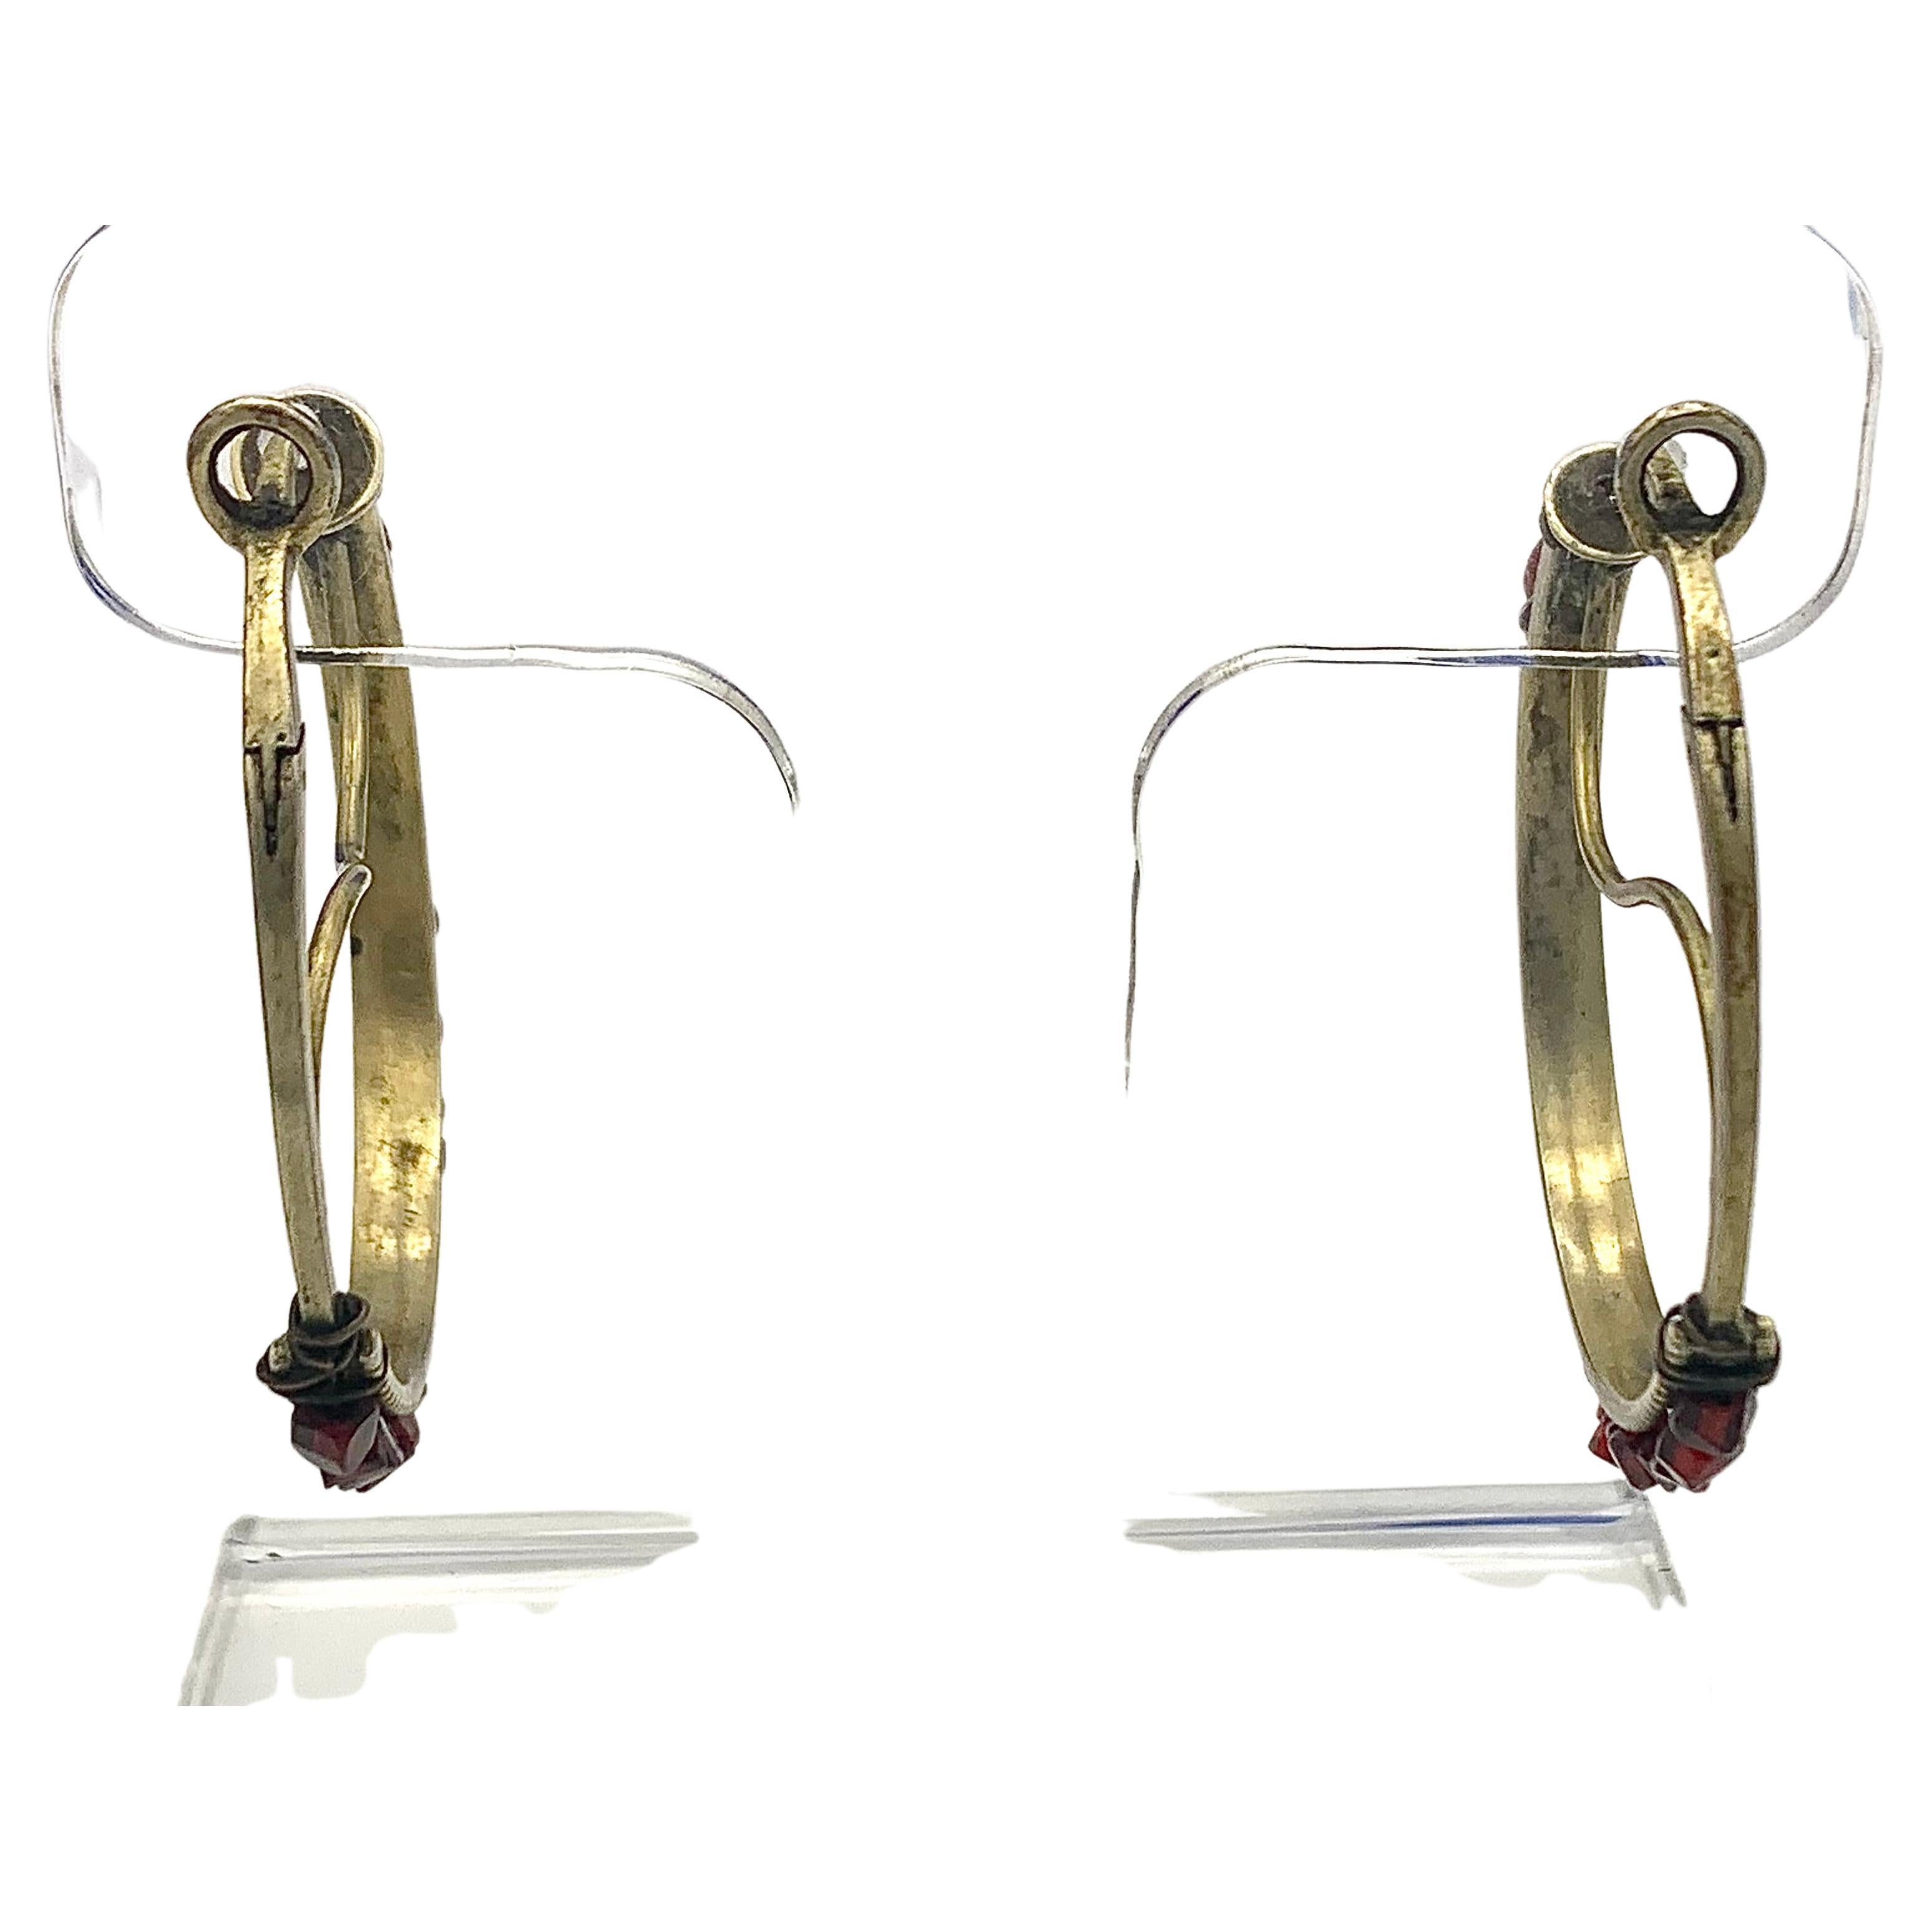 Antique 2nd Quarter 19th Century Garnet Square Beads Hoop Earrings Silver Gilt  In Good Condition For Sale In Munich, Bavaria